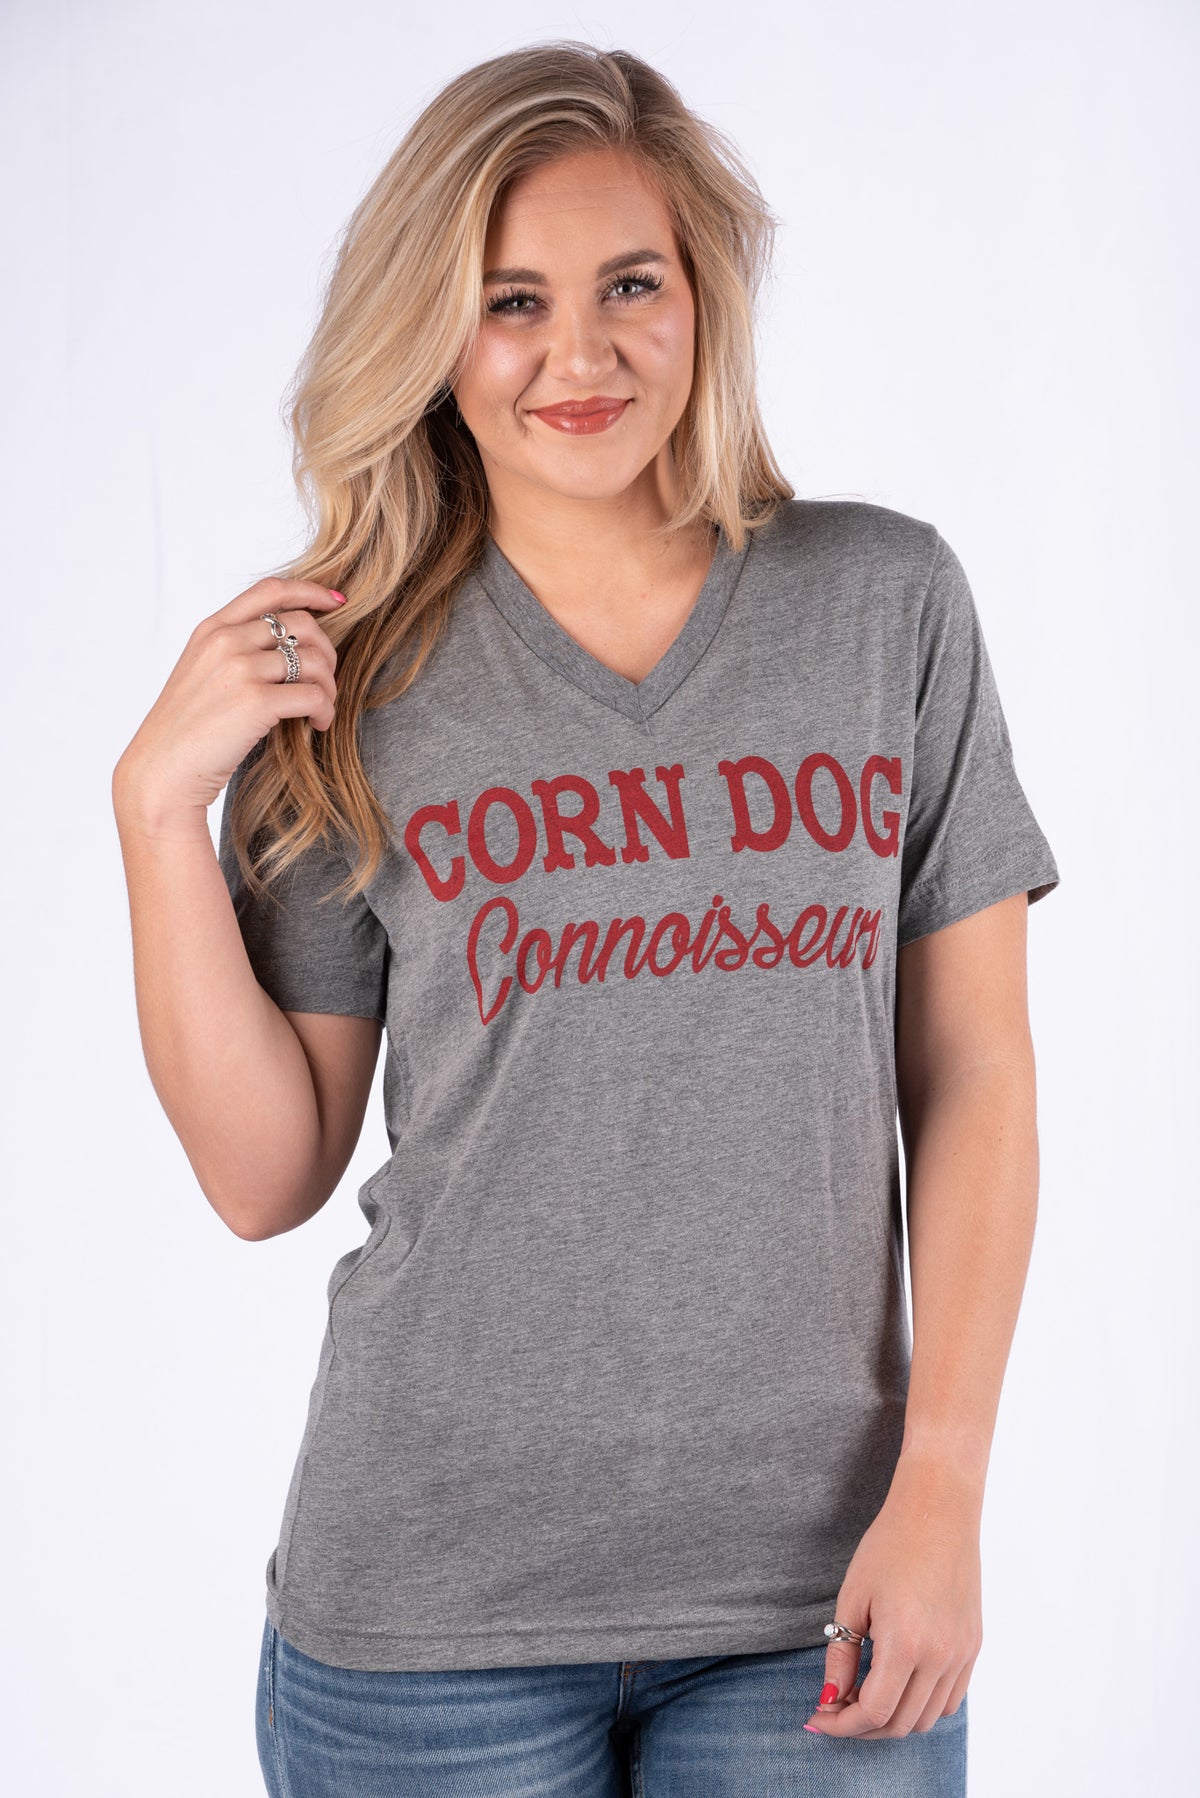 Corn dog connoisseur short sleeve v-neck t-shirt grey - Stylish T-shirts - Trendy Graphic T-Shirts and Tank Tops at Lush Fashion Lounge Boutique in Oklahoma City